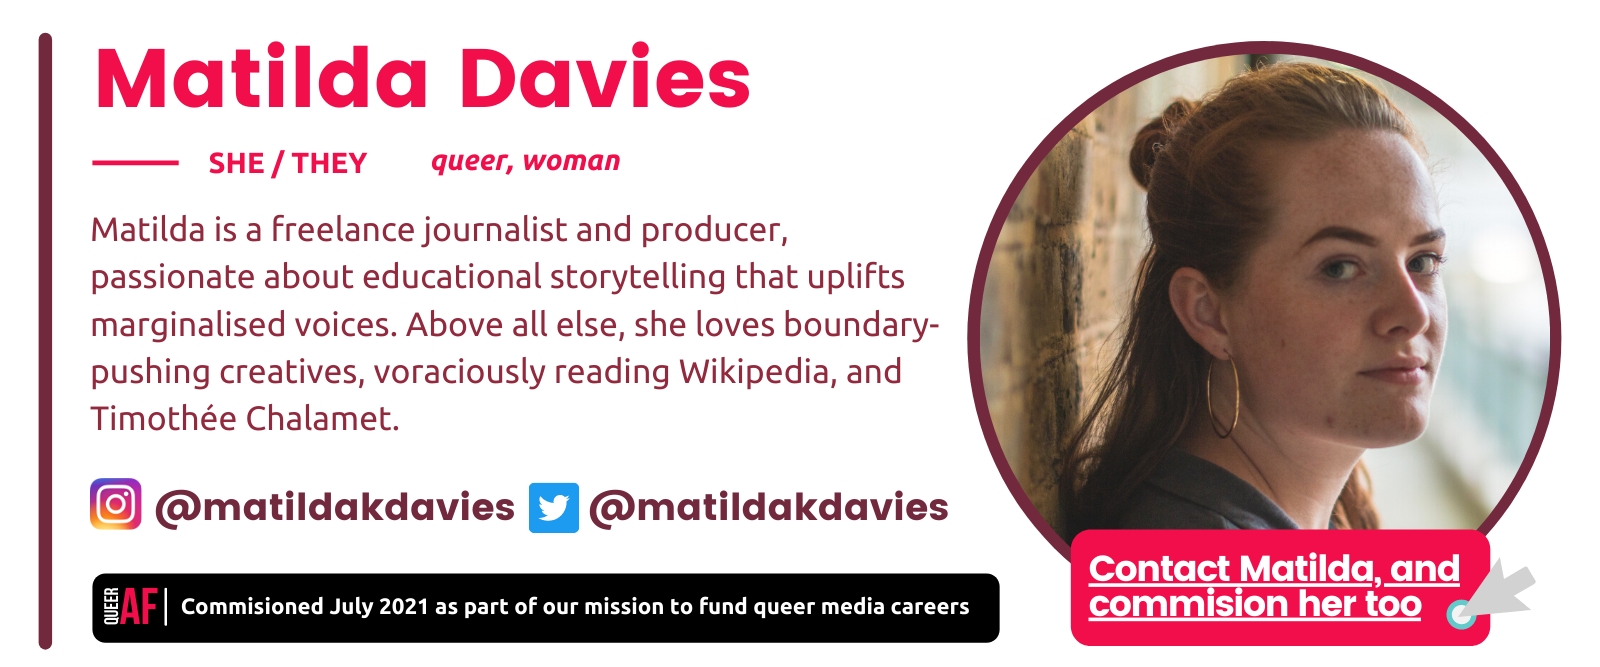 Matilda Davies bio box: She/They. Queer, woman. Matilda is a freelance journalist and producer, passionate about educational storytelling that uplifts marginalised voices. Above all else, she loves boundary-pushing creatives, voraciously reading Wikipedia, and Timothée Chalamet.@matildakdavies. Commisioned July 2021 as part of our mission to fund queer careers